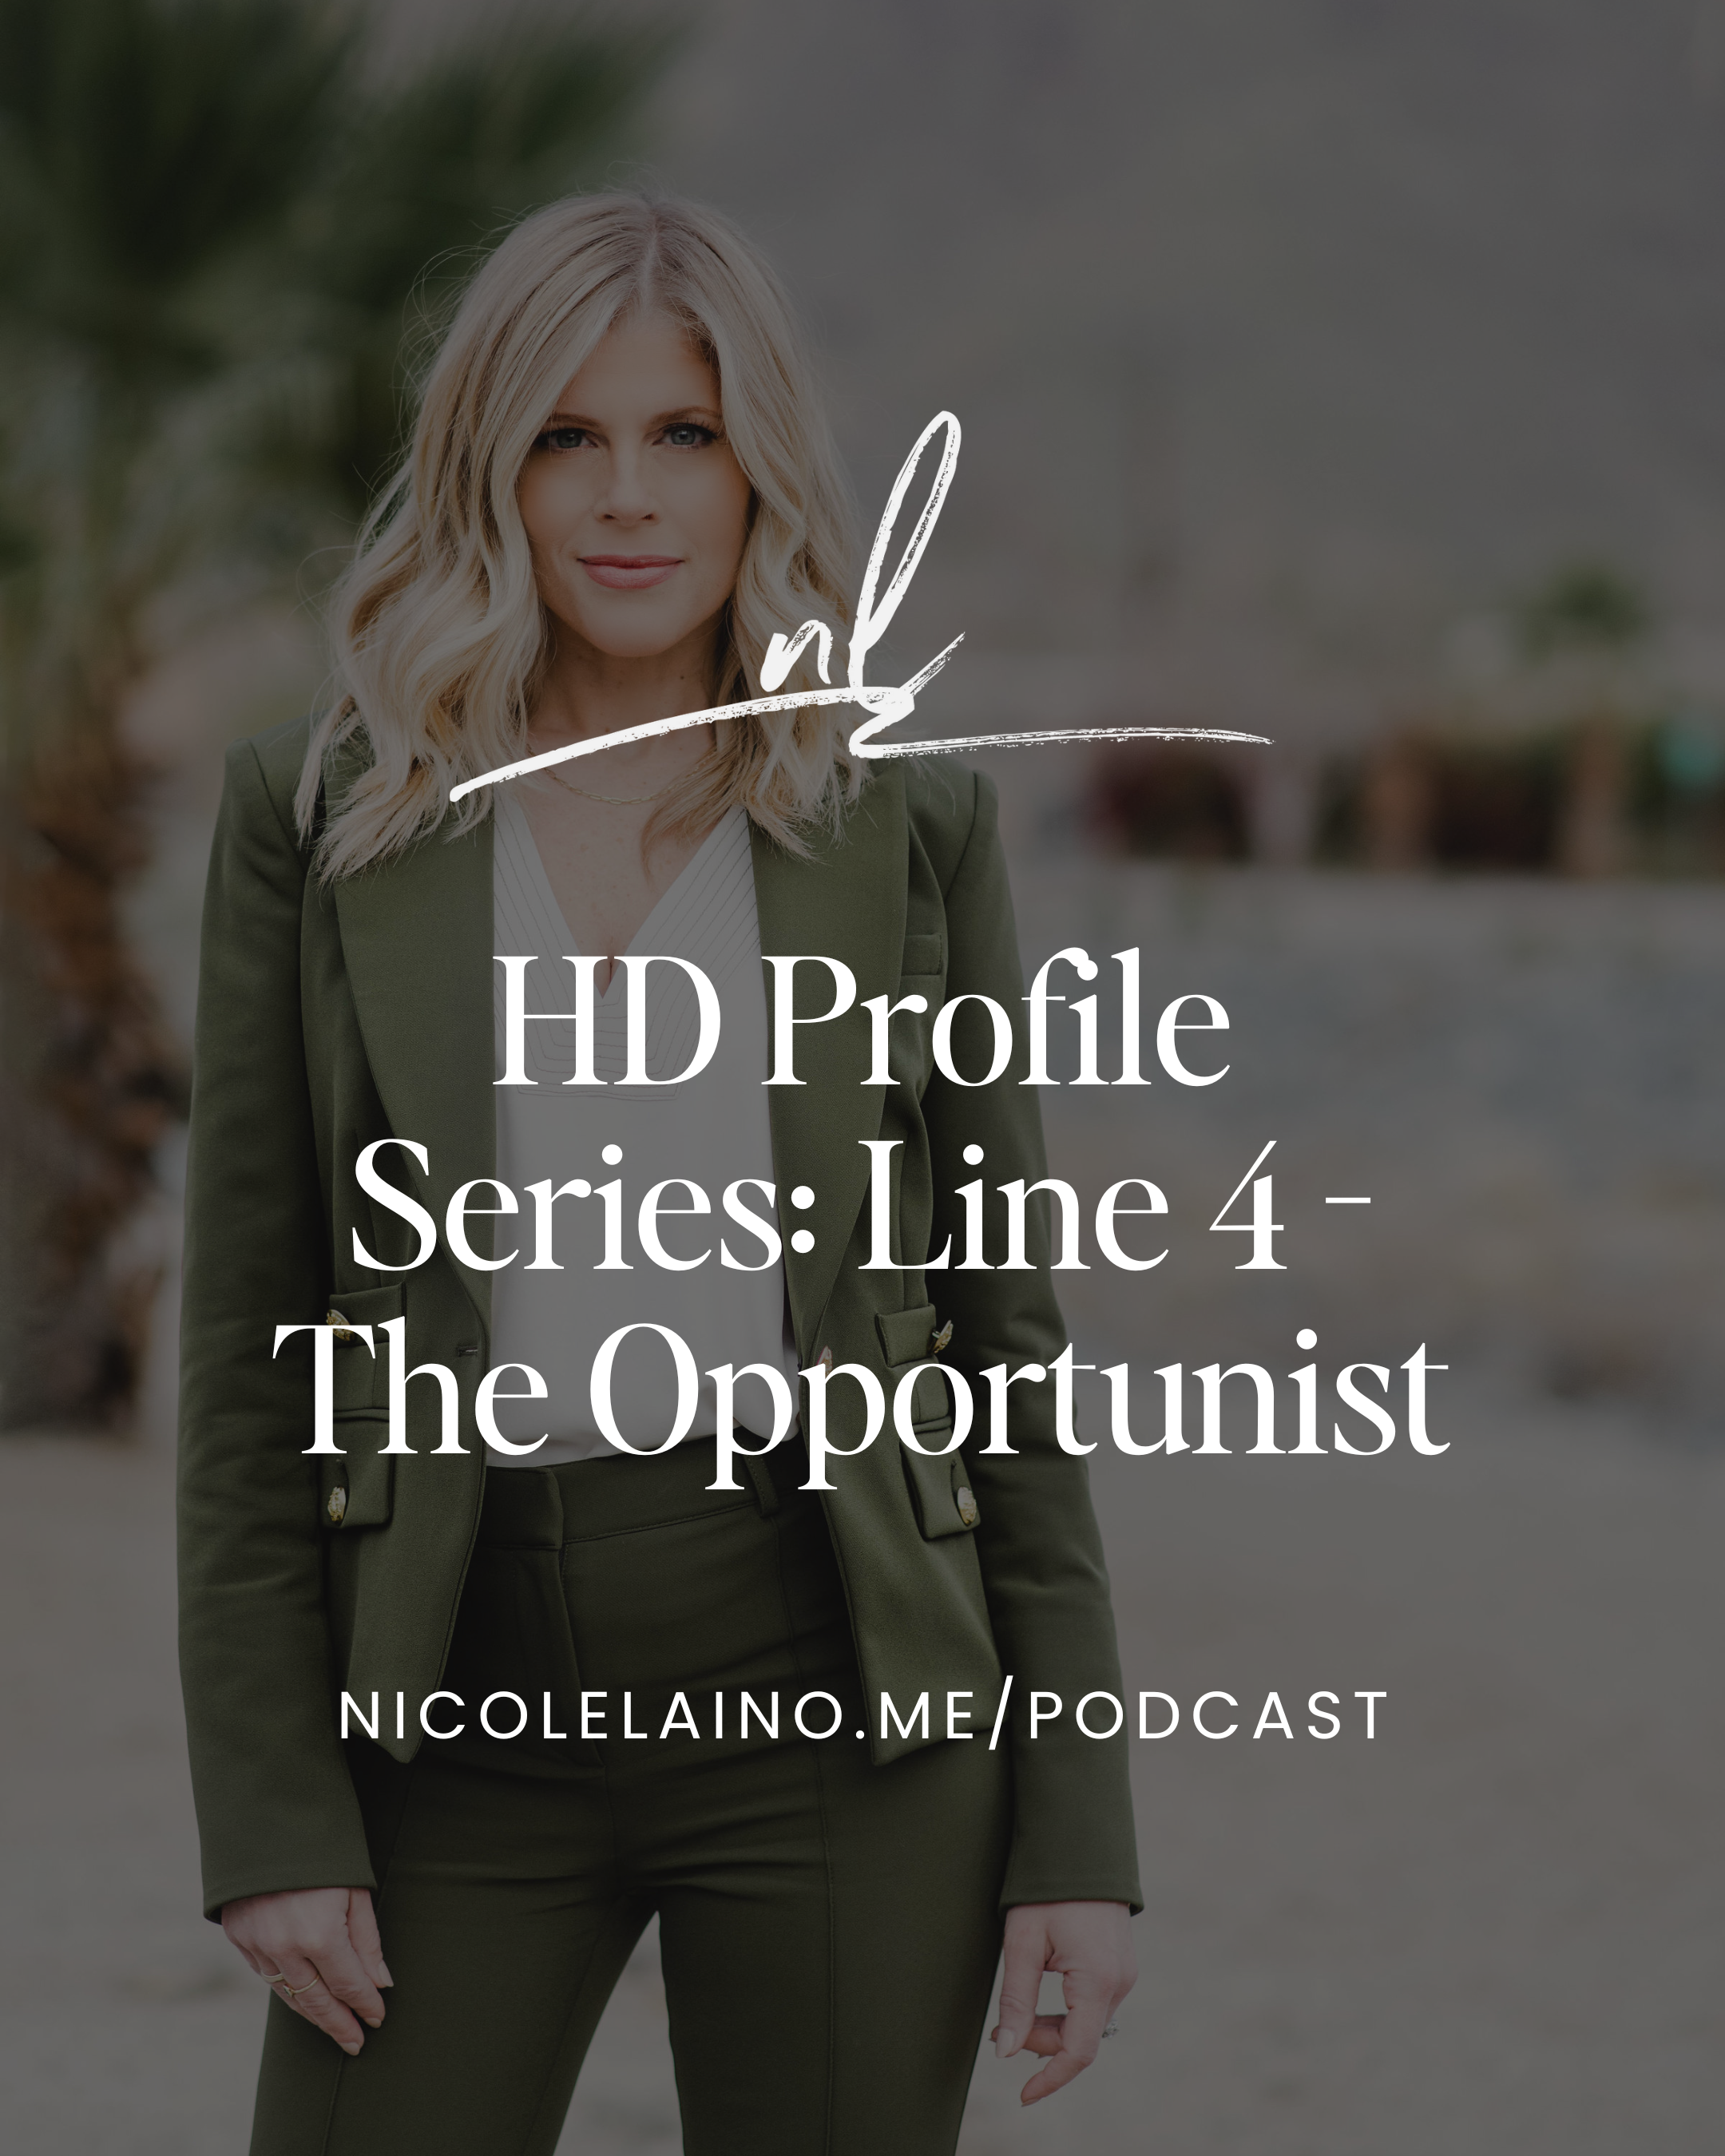 HD Profile Series: Line 4 - The Opportunist